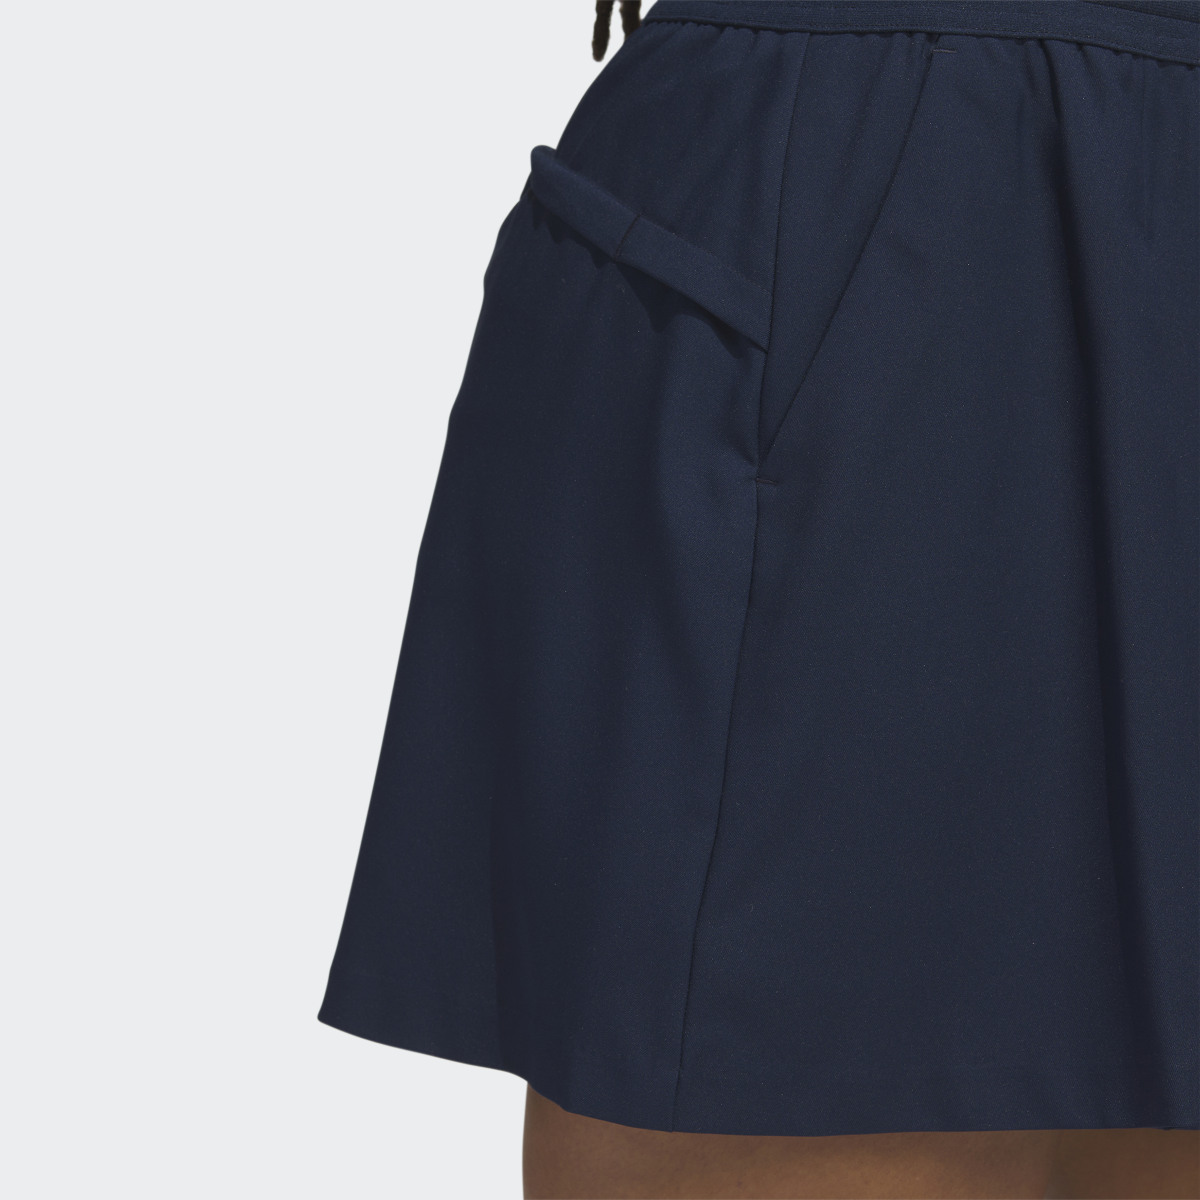 Adidas Made To Be Remade Flare Skirt. 8